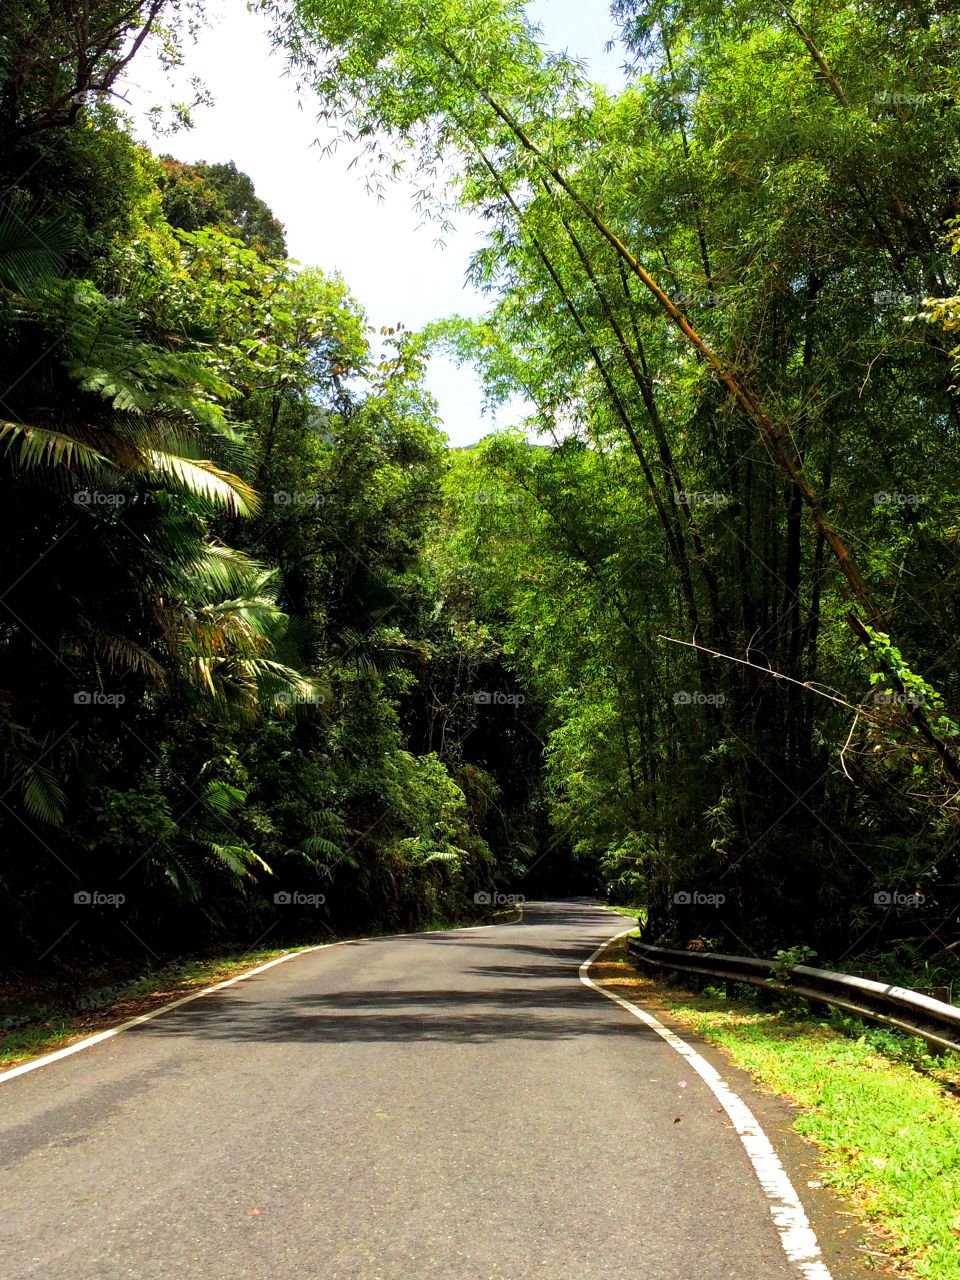 Rainforest Road. A winding road that leads deep into a lush rainforest: El Yunque in Puerto Rico.